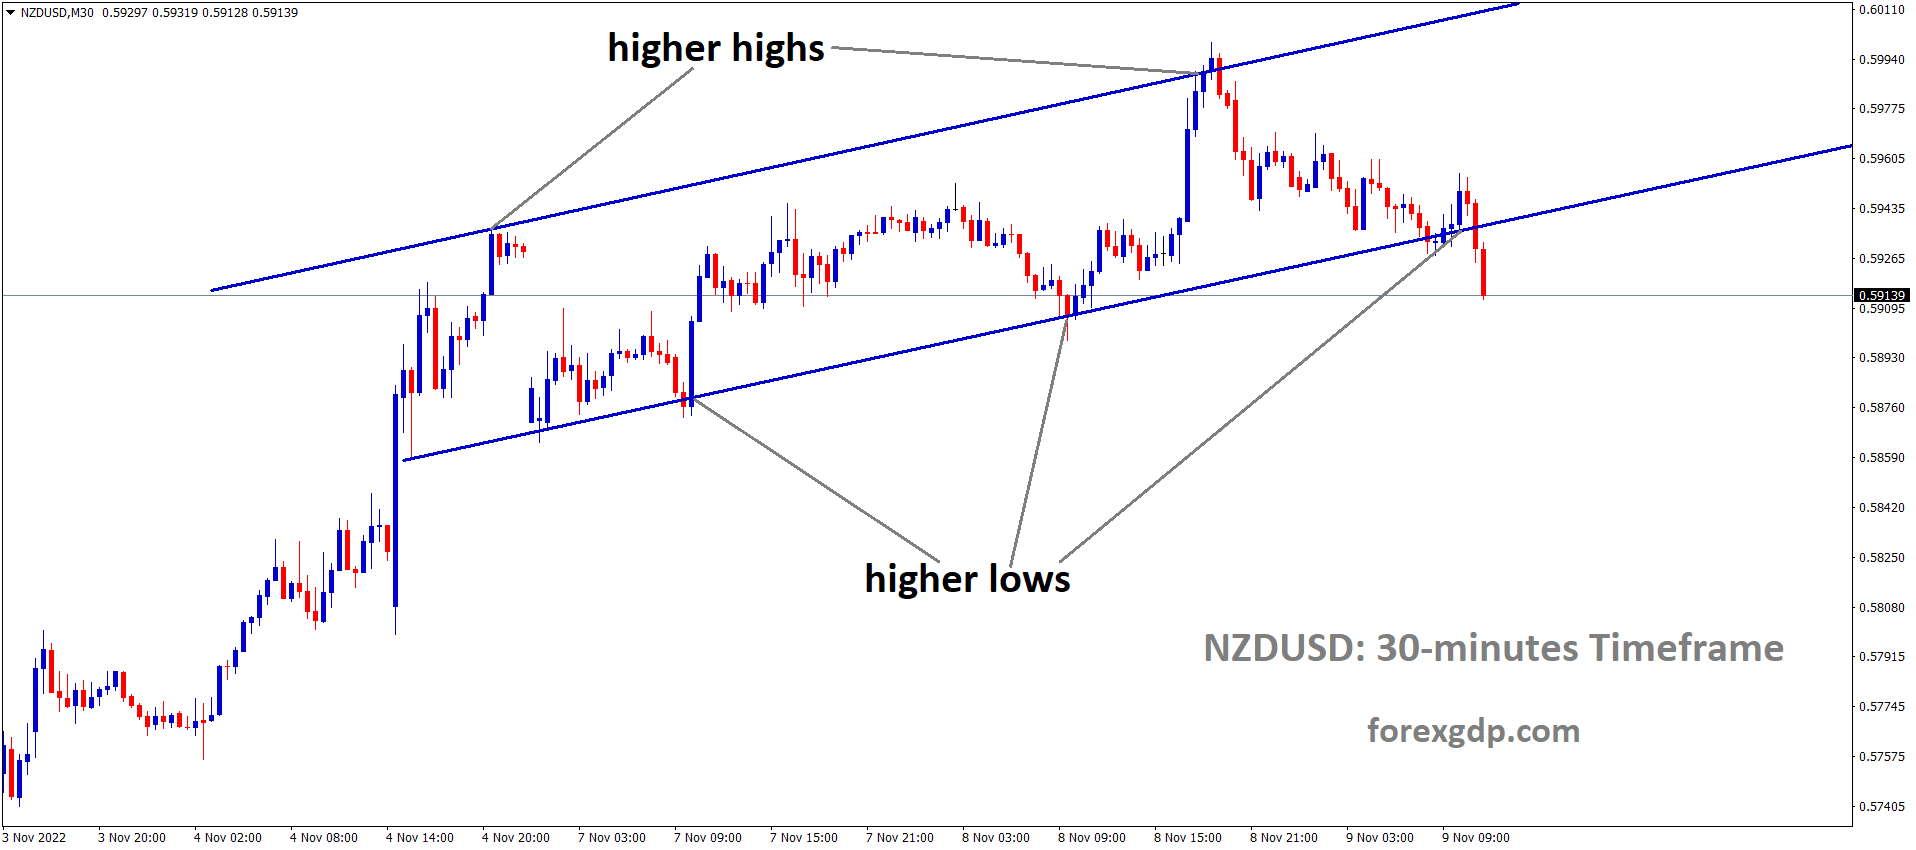 NZDUSD is moving in an Ascending channel and the market has reached the higher low area of the channel 1